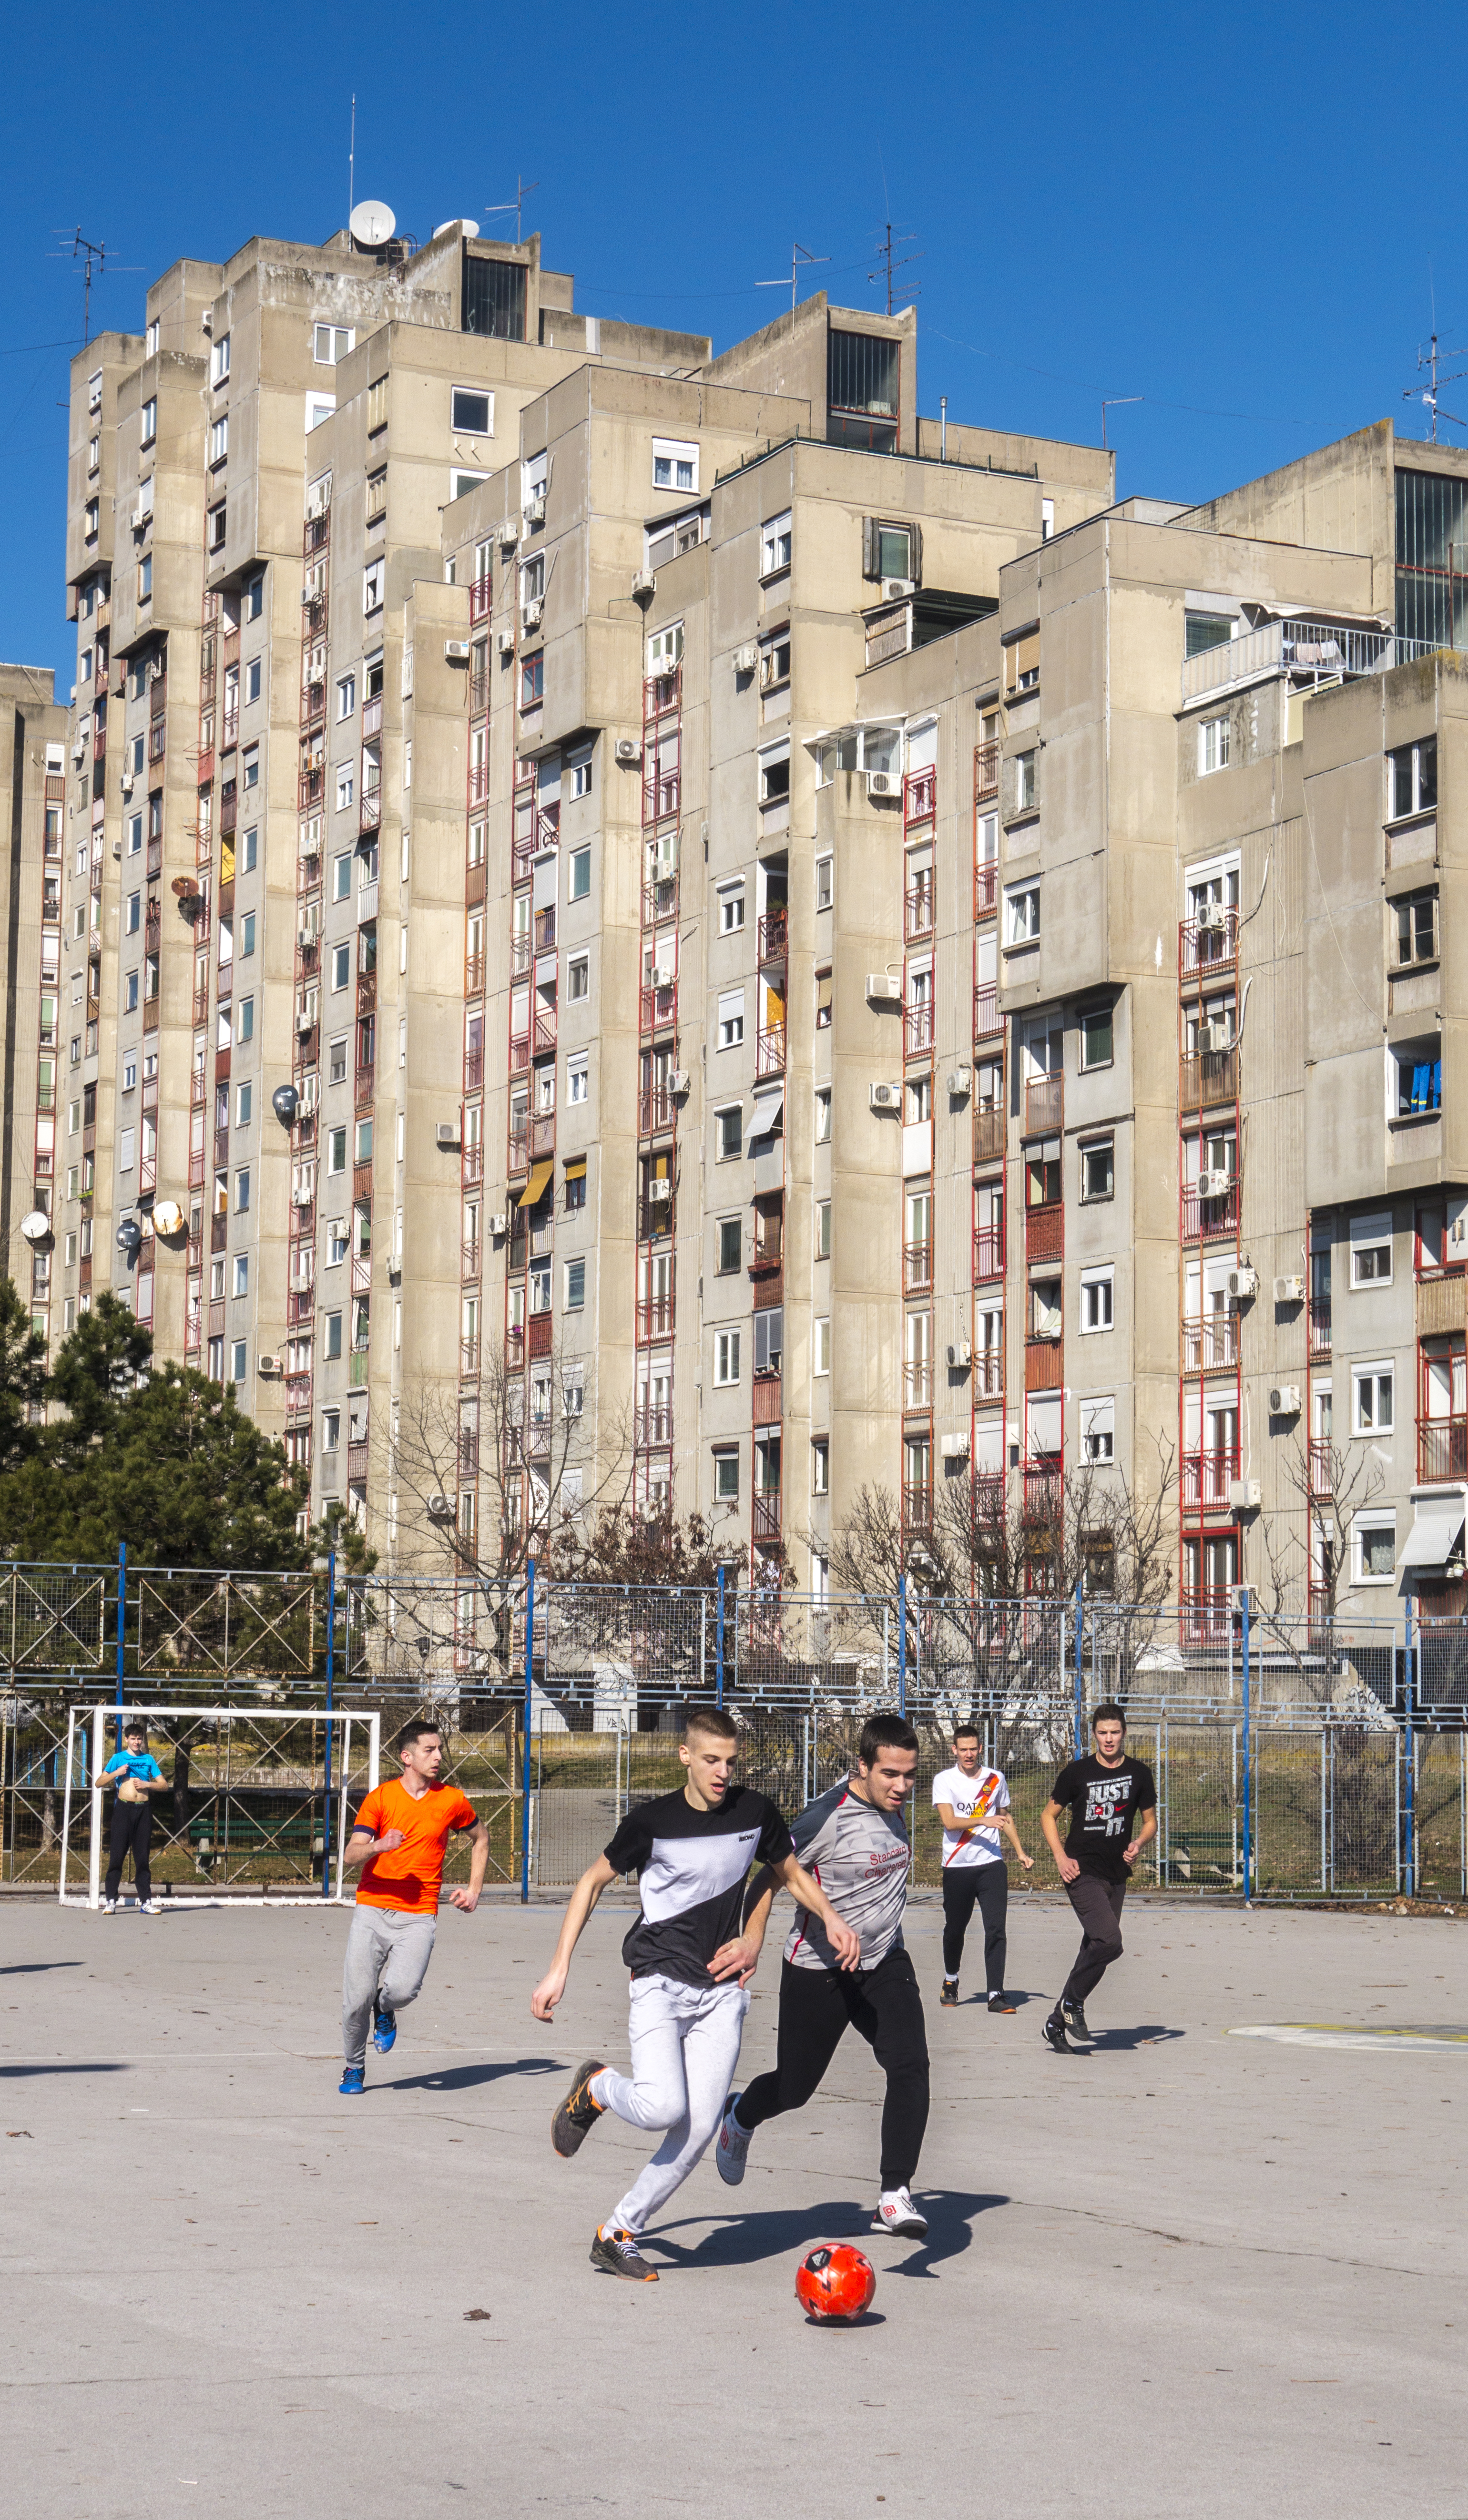 Young children play soccer on a concrete field in front of several concrete towers that belong to a mass housing project in Belgrade